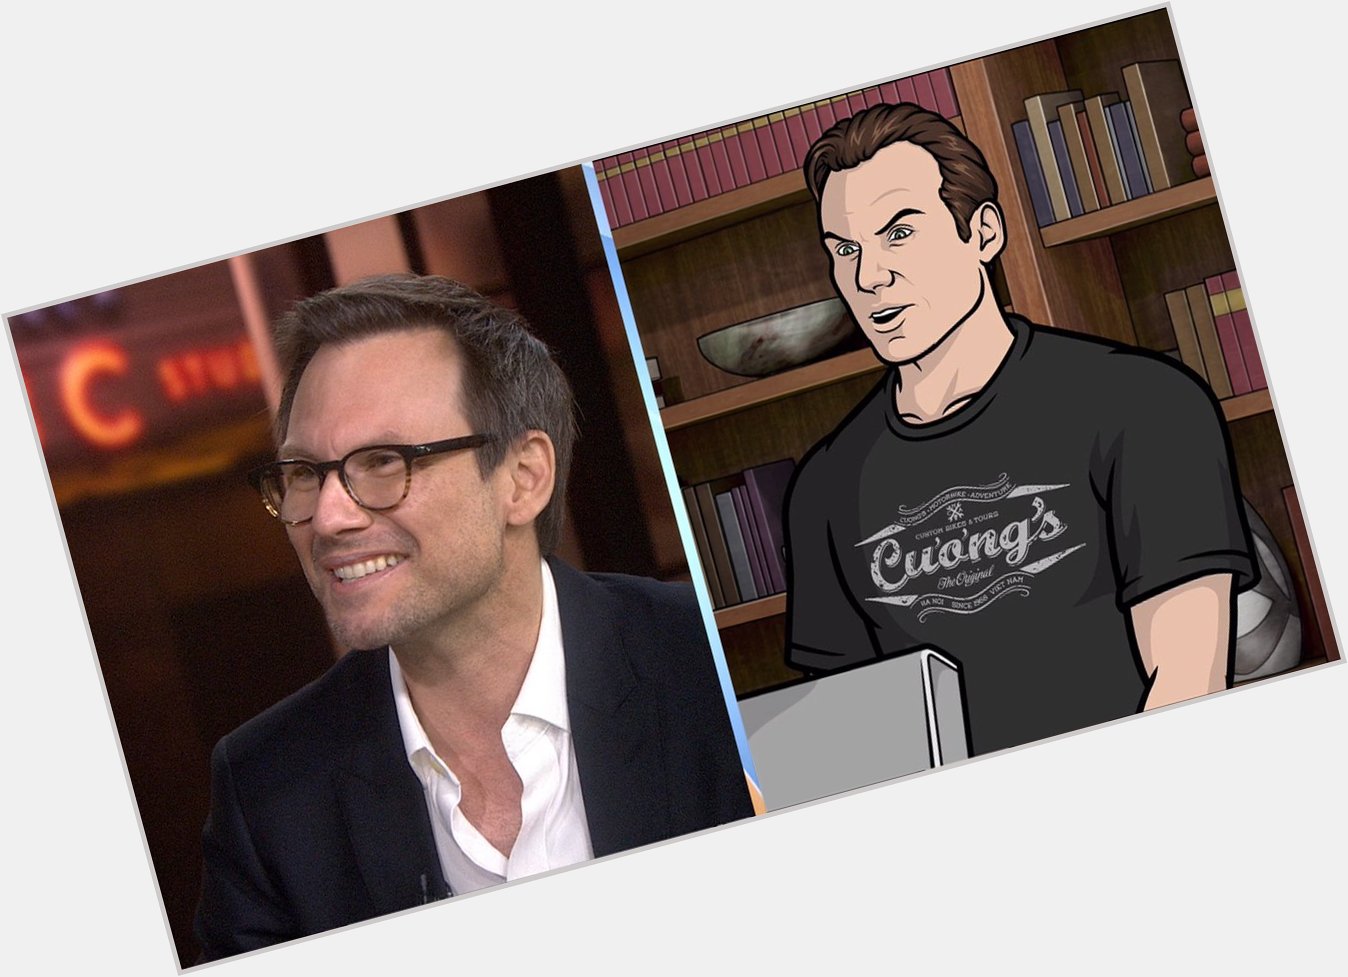 Happy Birthday Christian Slater! We thought he was really great as Slater in Archer... 